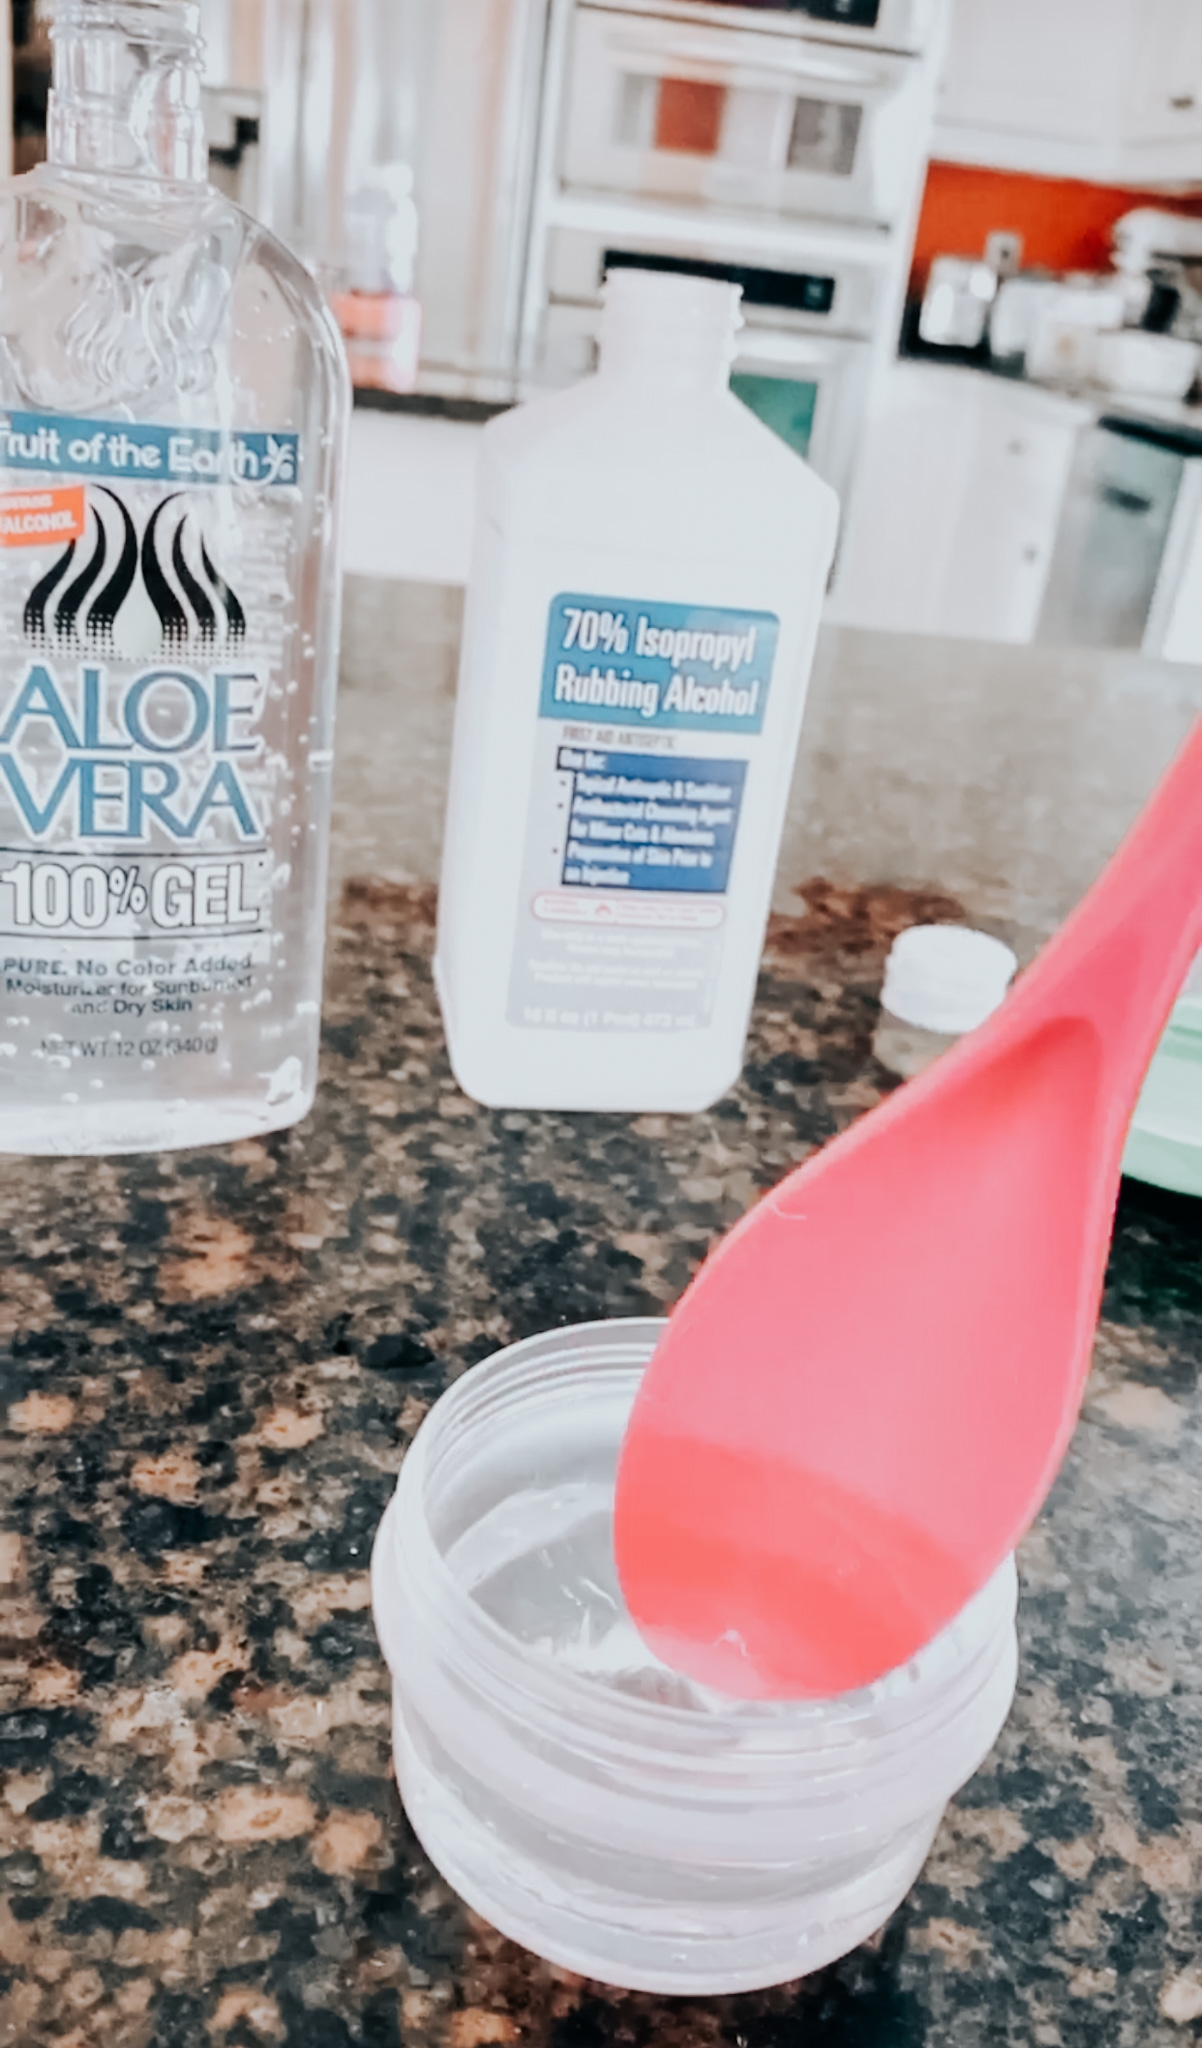 DIY Hand Sanitizer by Alabama Life + Style Blogger, Heather Brown // My Life Well Loved